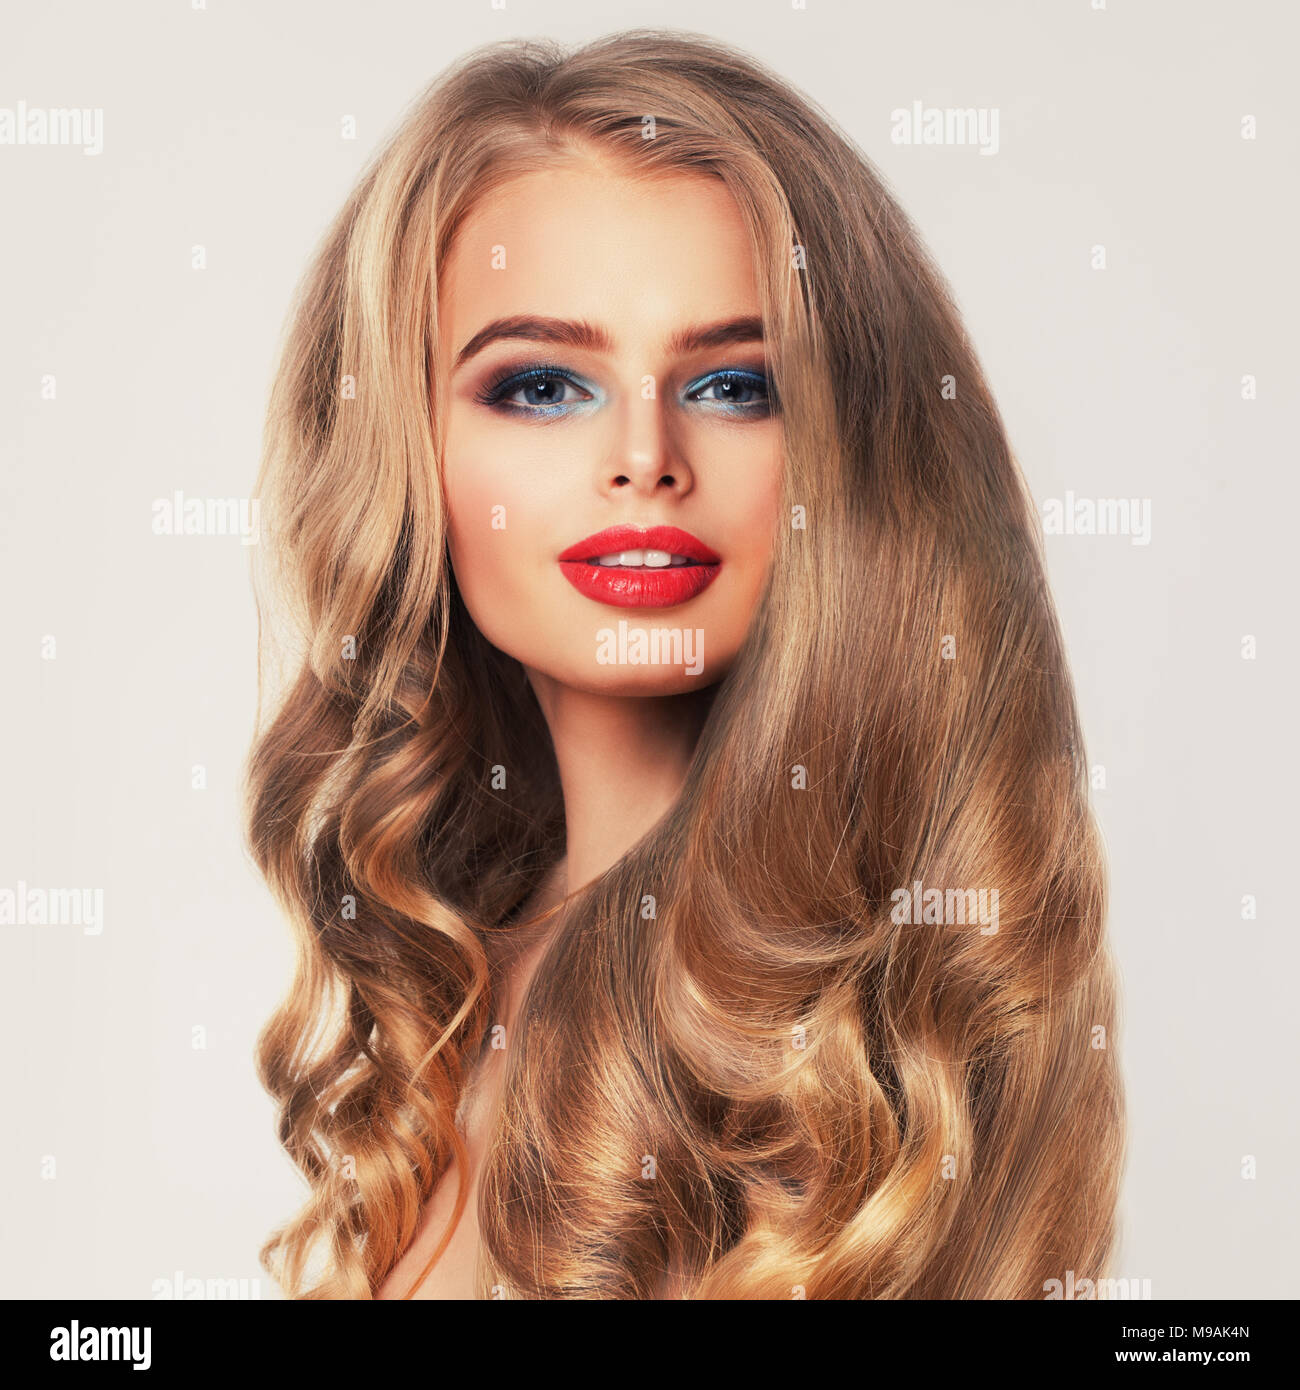 Healthy Woman with Long Blonde Hair and Makeup. Permed Hairstyle Stock Photo